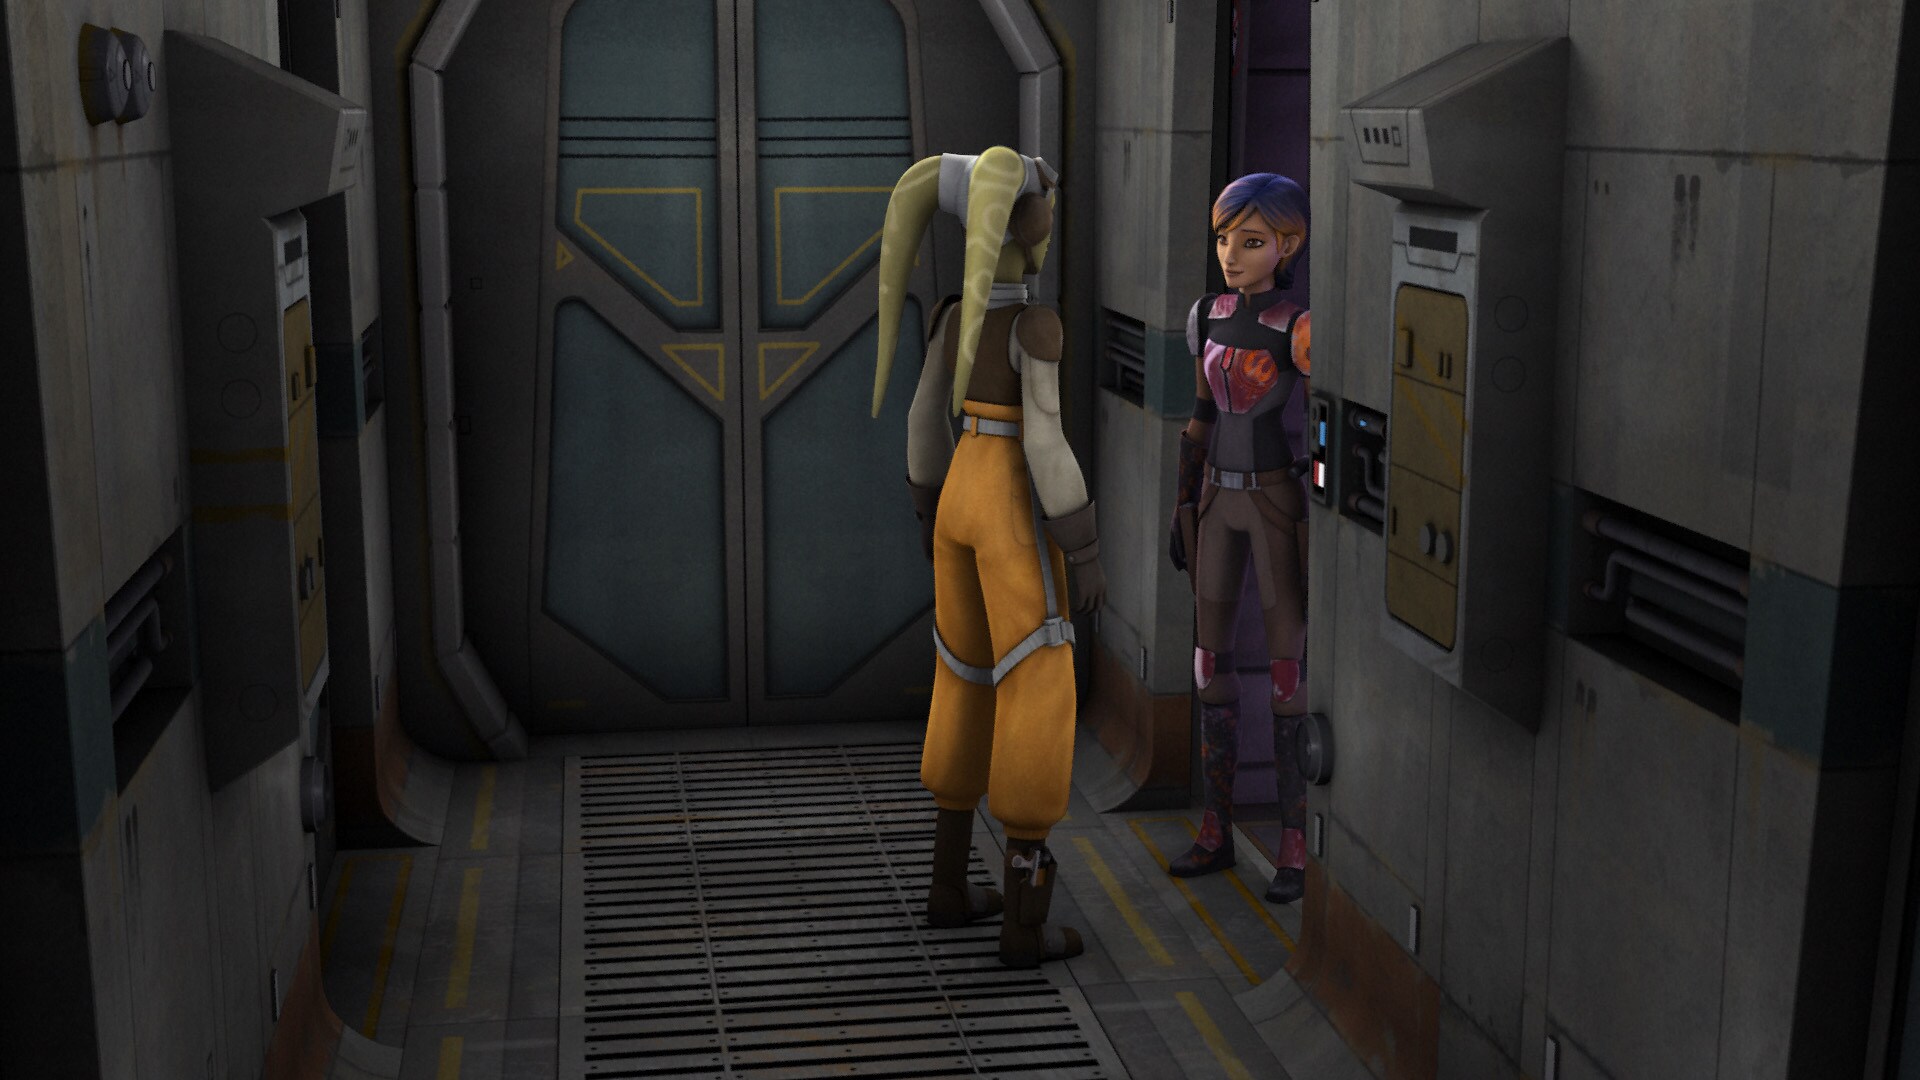 Putting aside their quarrel, Hera and Sabine worked together until their friends arrived to rescu...